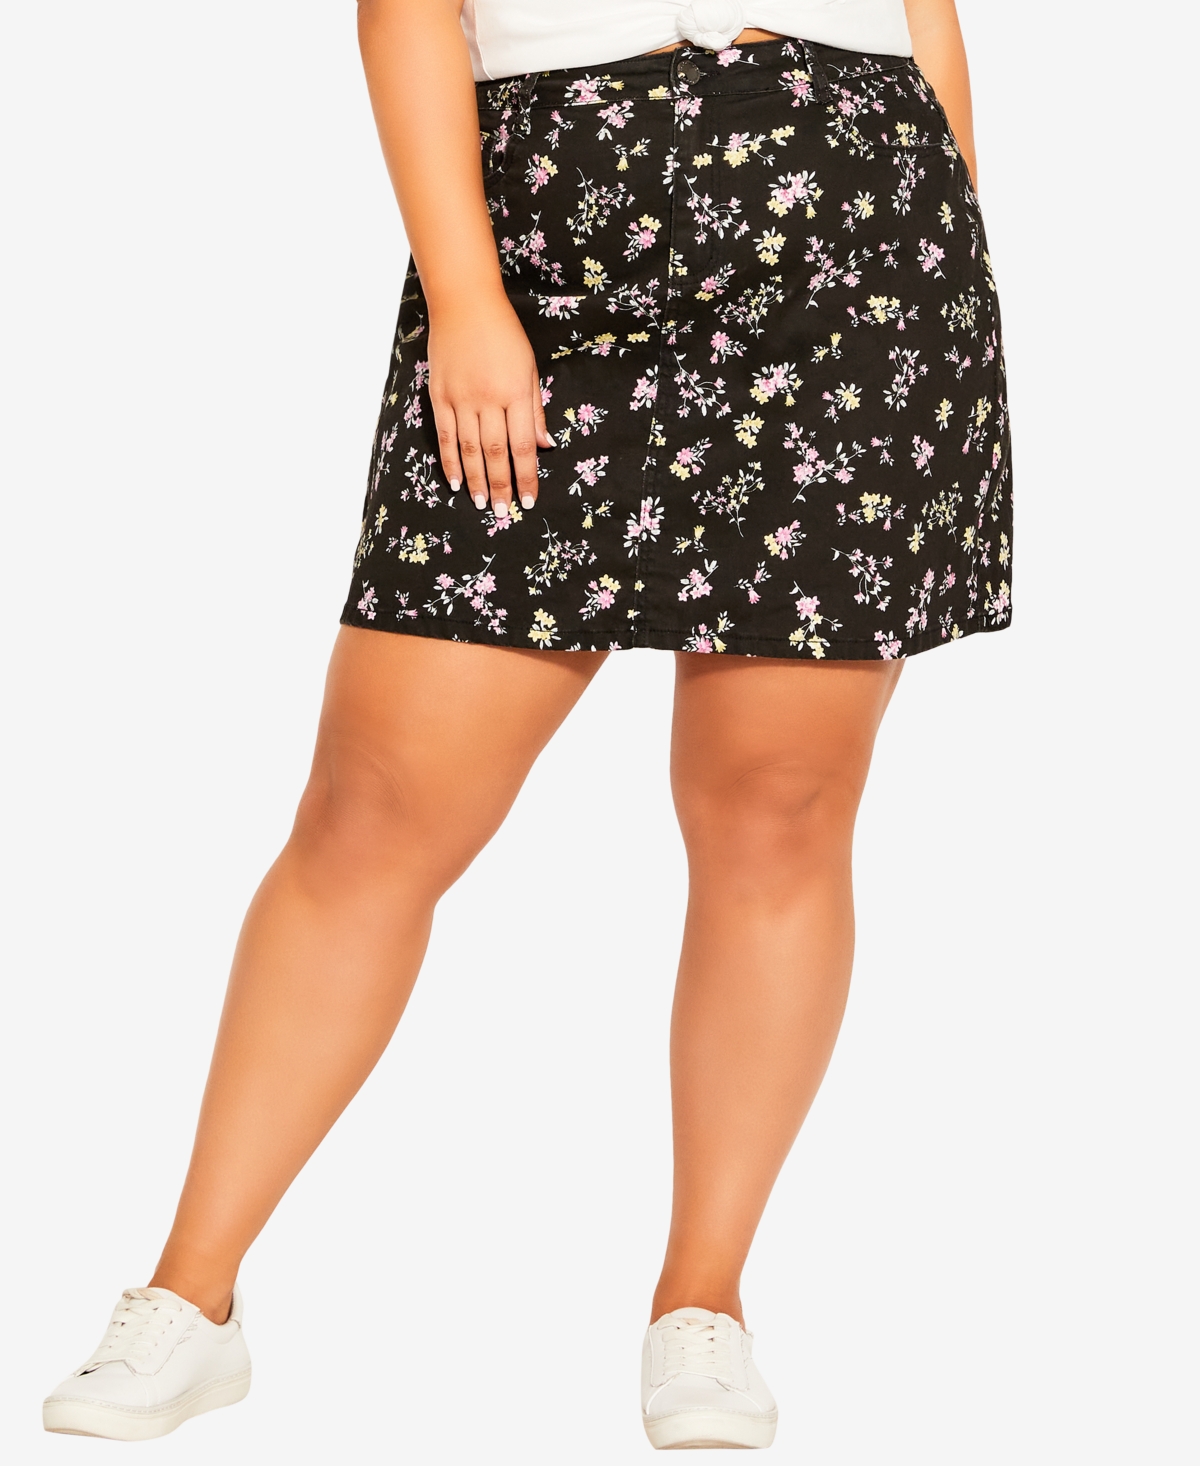 CITY CHIC TRENDY PLUS SIZE FLORAL SUMMER DITSY SKIRT